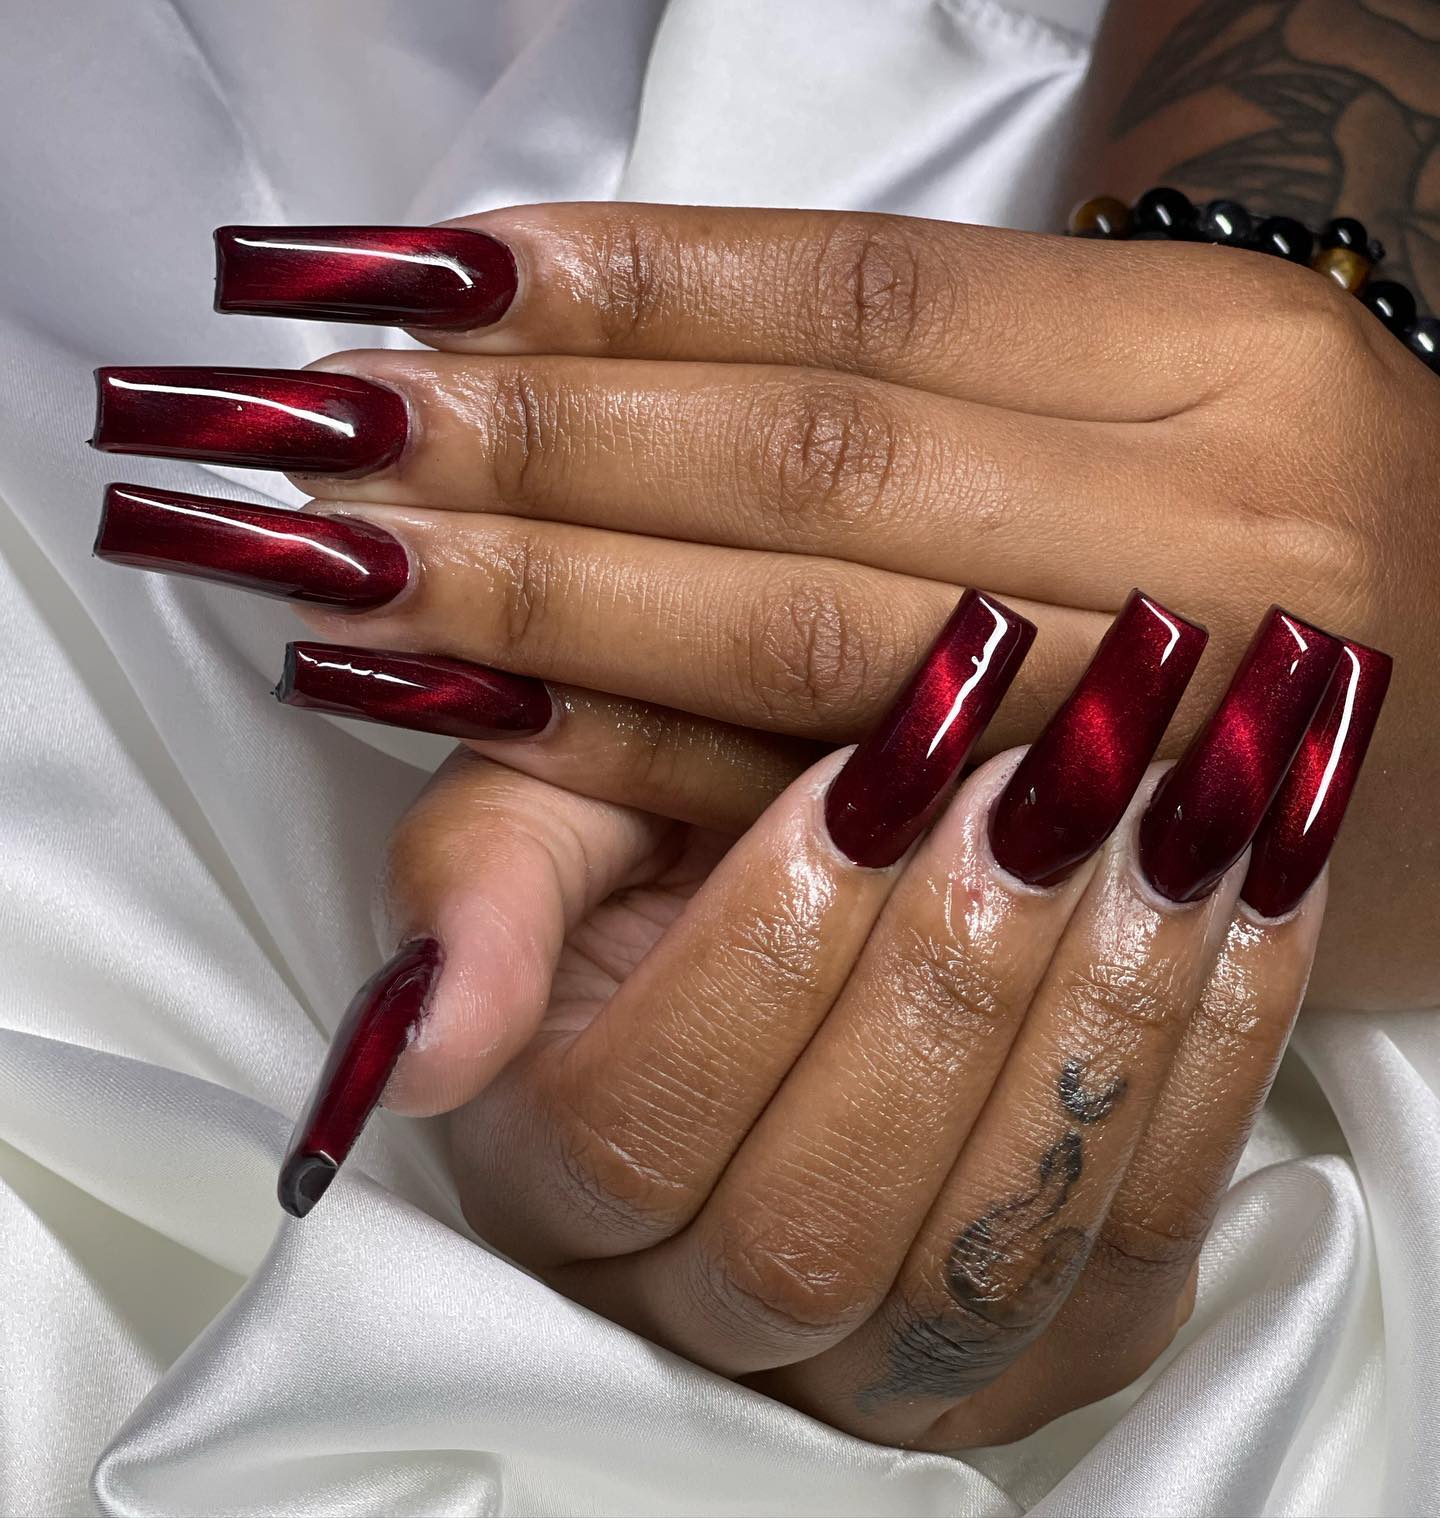 Clared red is one of the sexiest nail colors, for sure. On your long square clared red nails, bright red cat eye nail art can be used to take your nails to a different level.